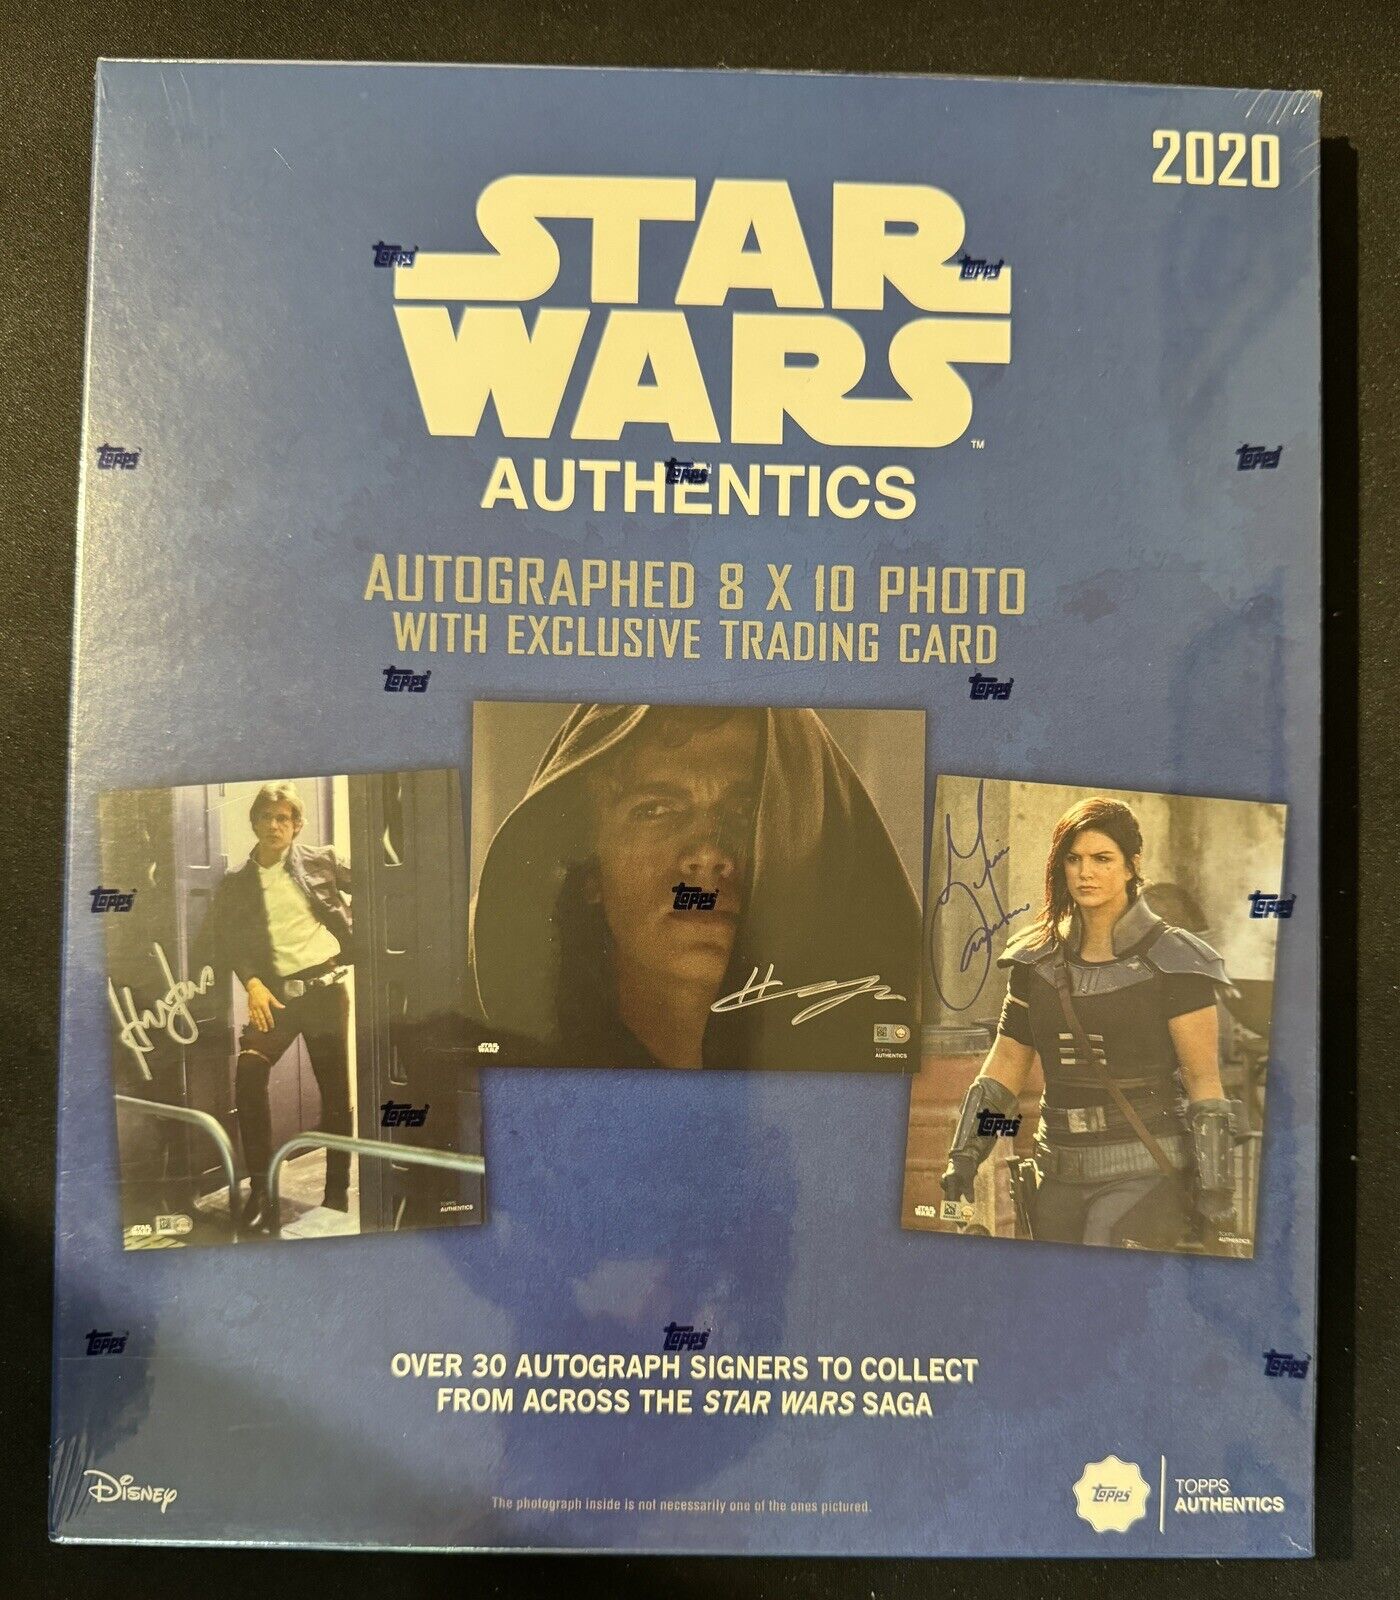 2020 Topps Star Wars Authentics Sealed Box 1 Autographed 8 x 10 1 Trading Card